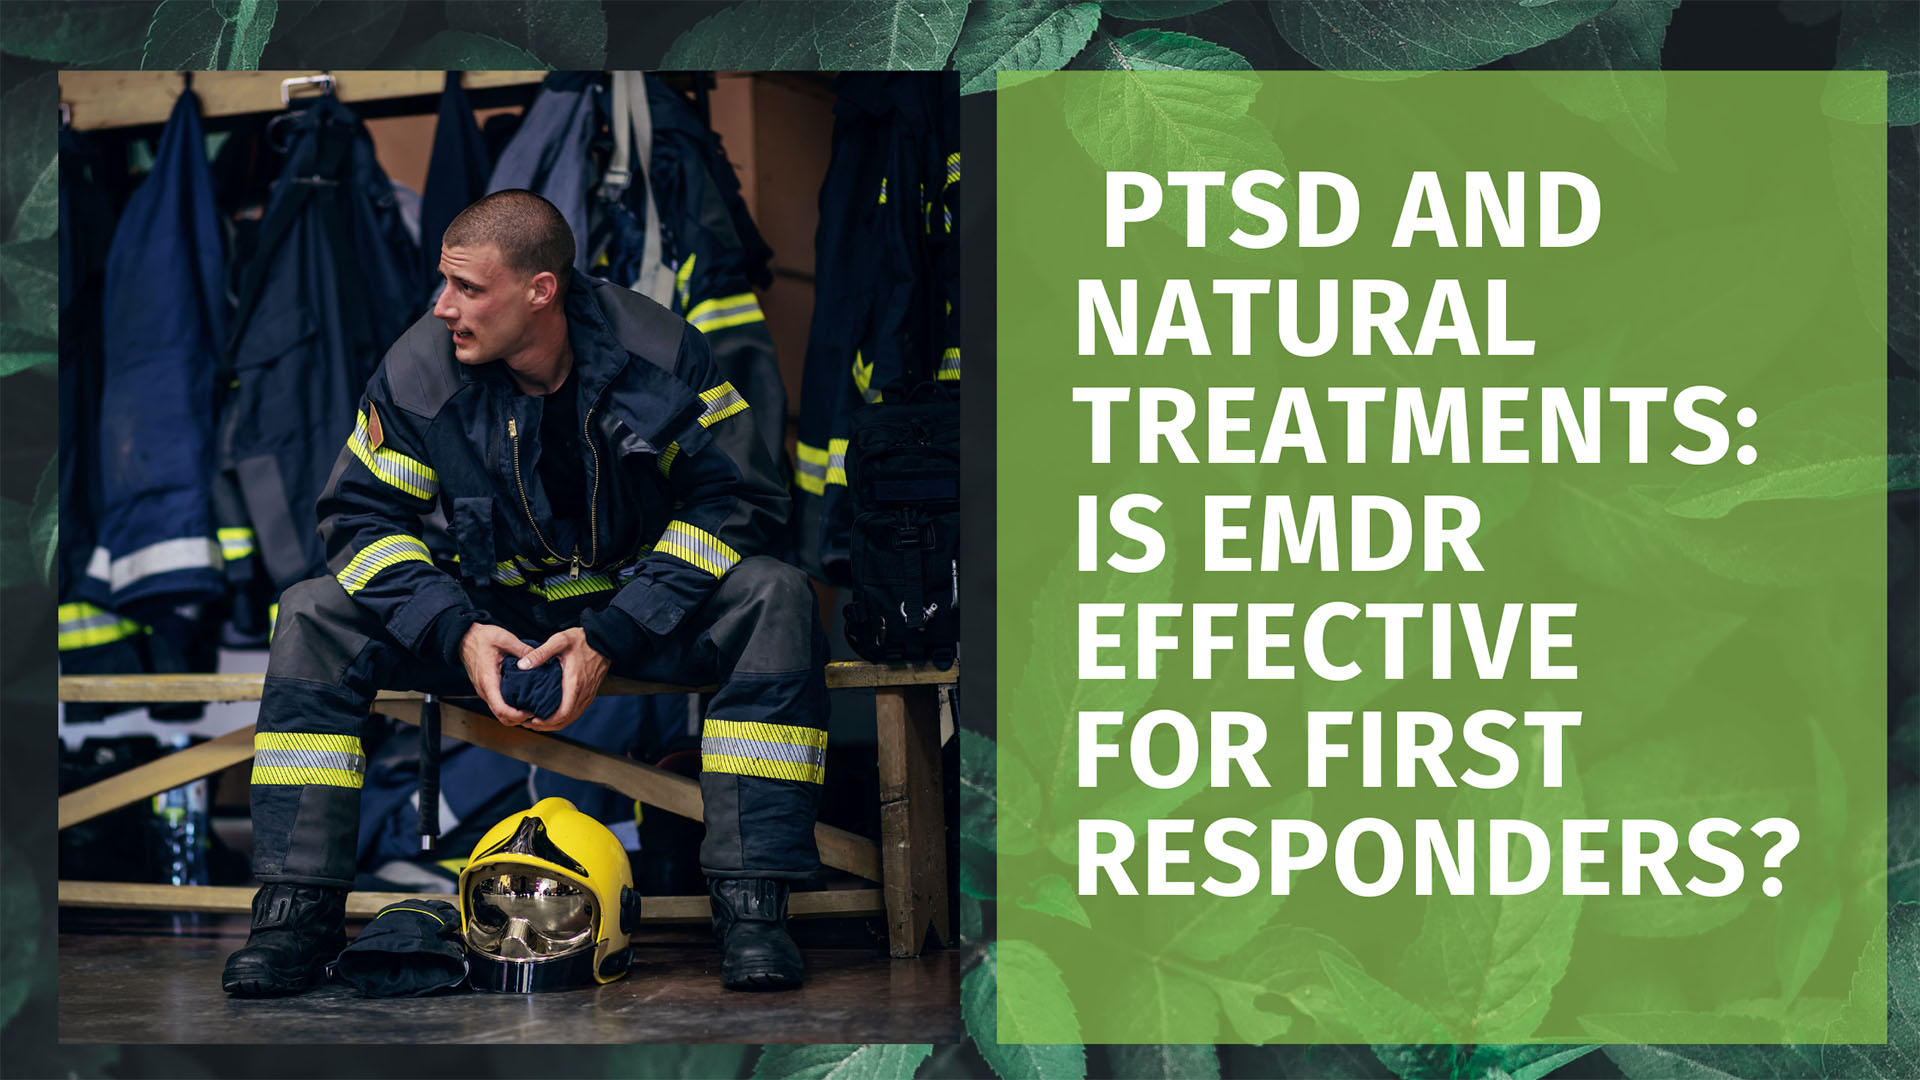 Effective PTSD Natural Treatments for First Responders: Helping the Helpers